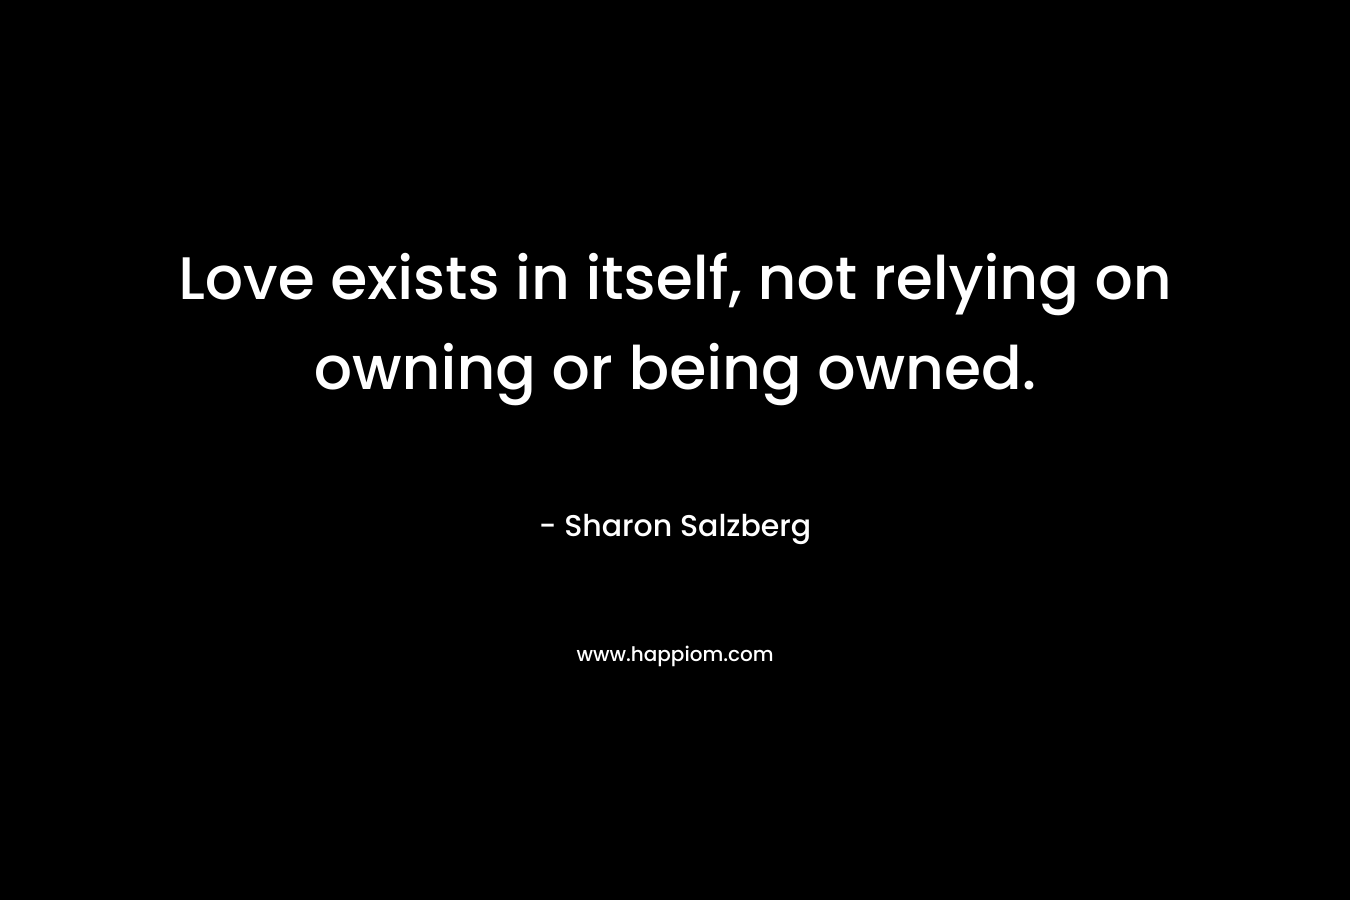 Love exists in itself, not relying on owning or being owned. – Sharon Salzberg